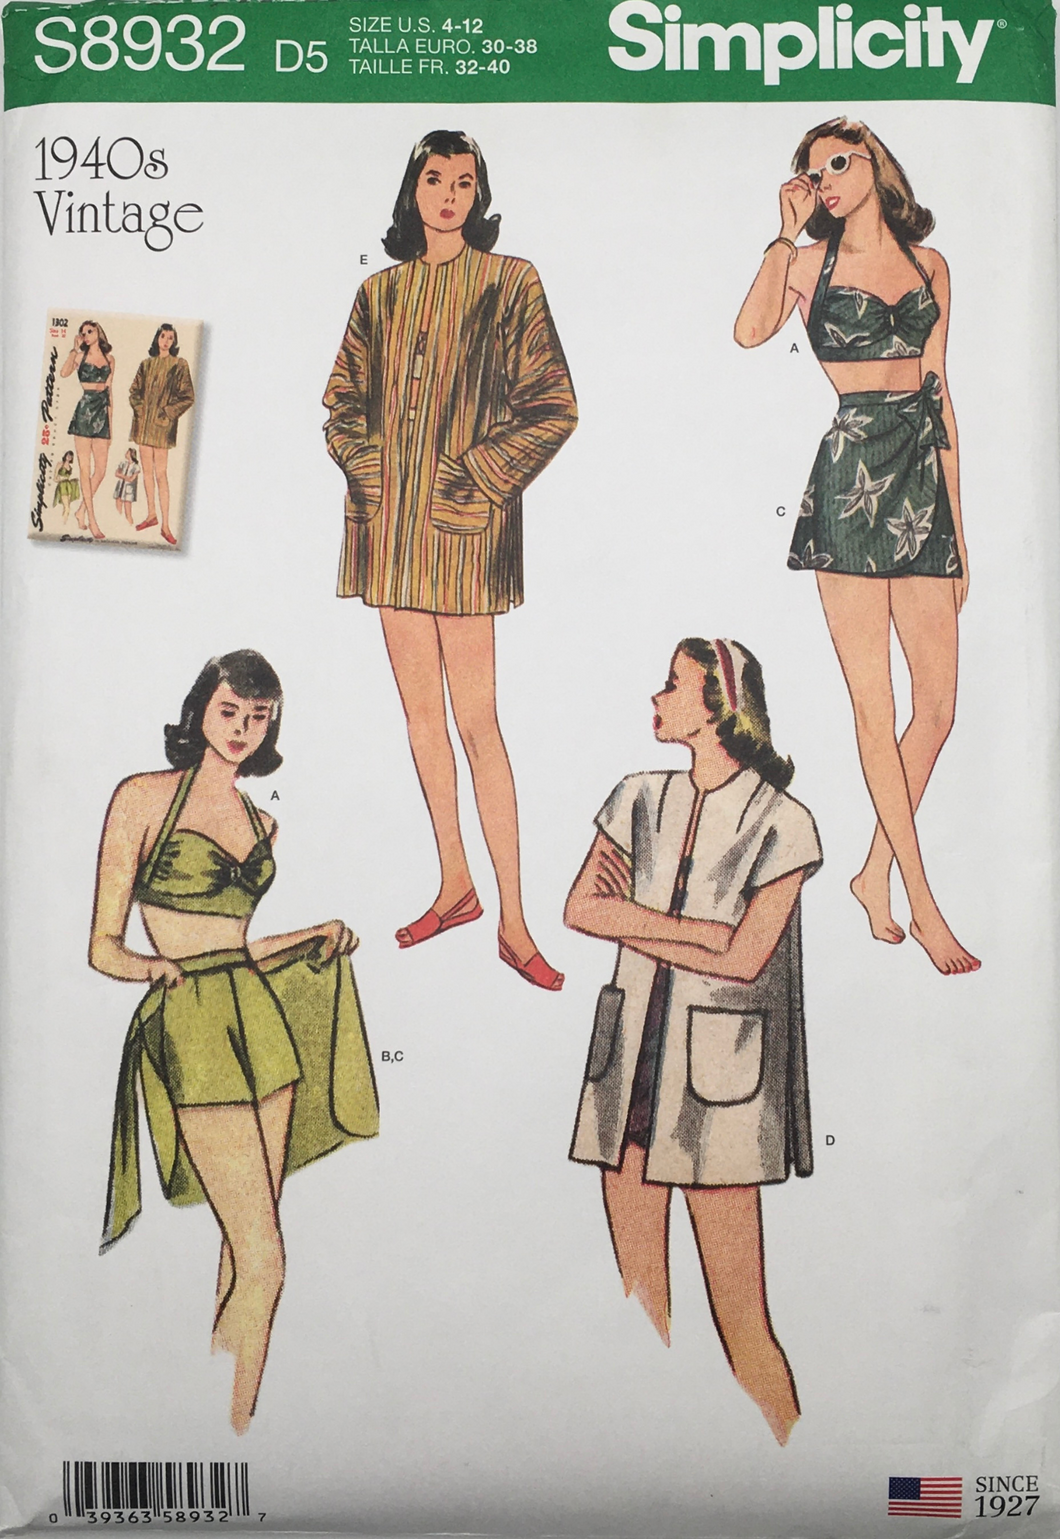 1940's Reproduction Sewing Pattern: Simplicity S8932